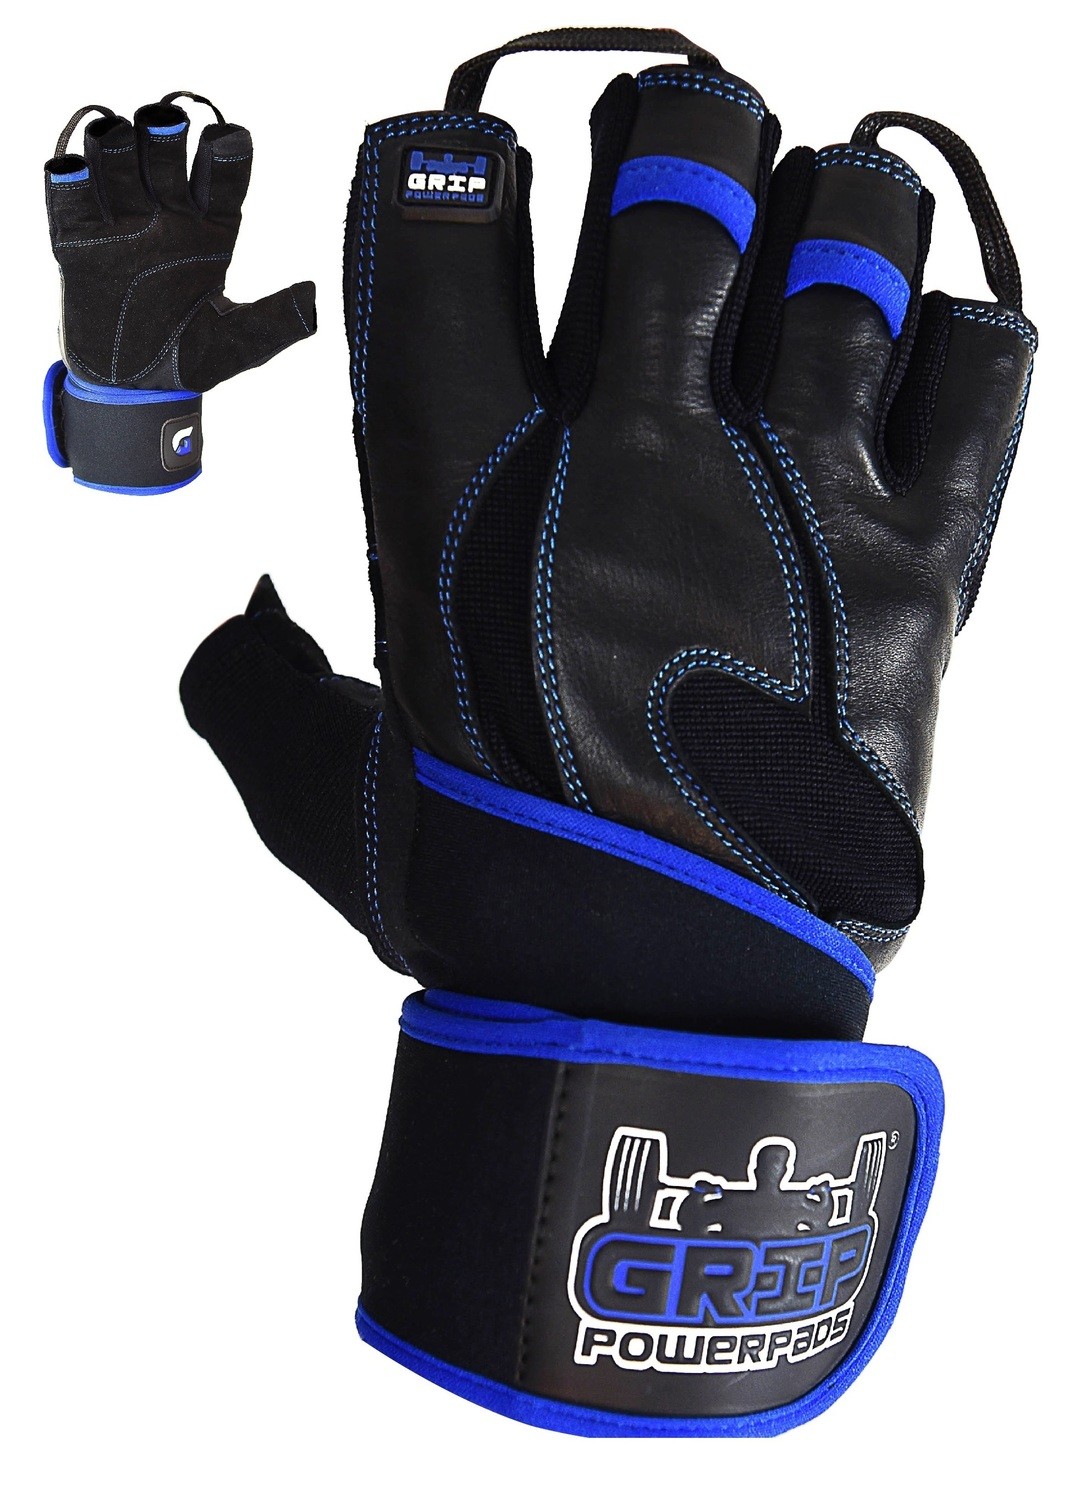 Gym Gloves - Ranger with Built in 2" Wide Wrist Wraps